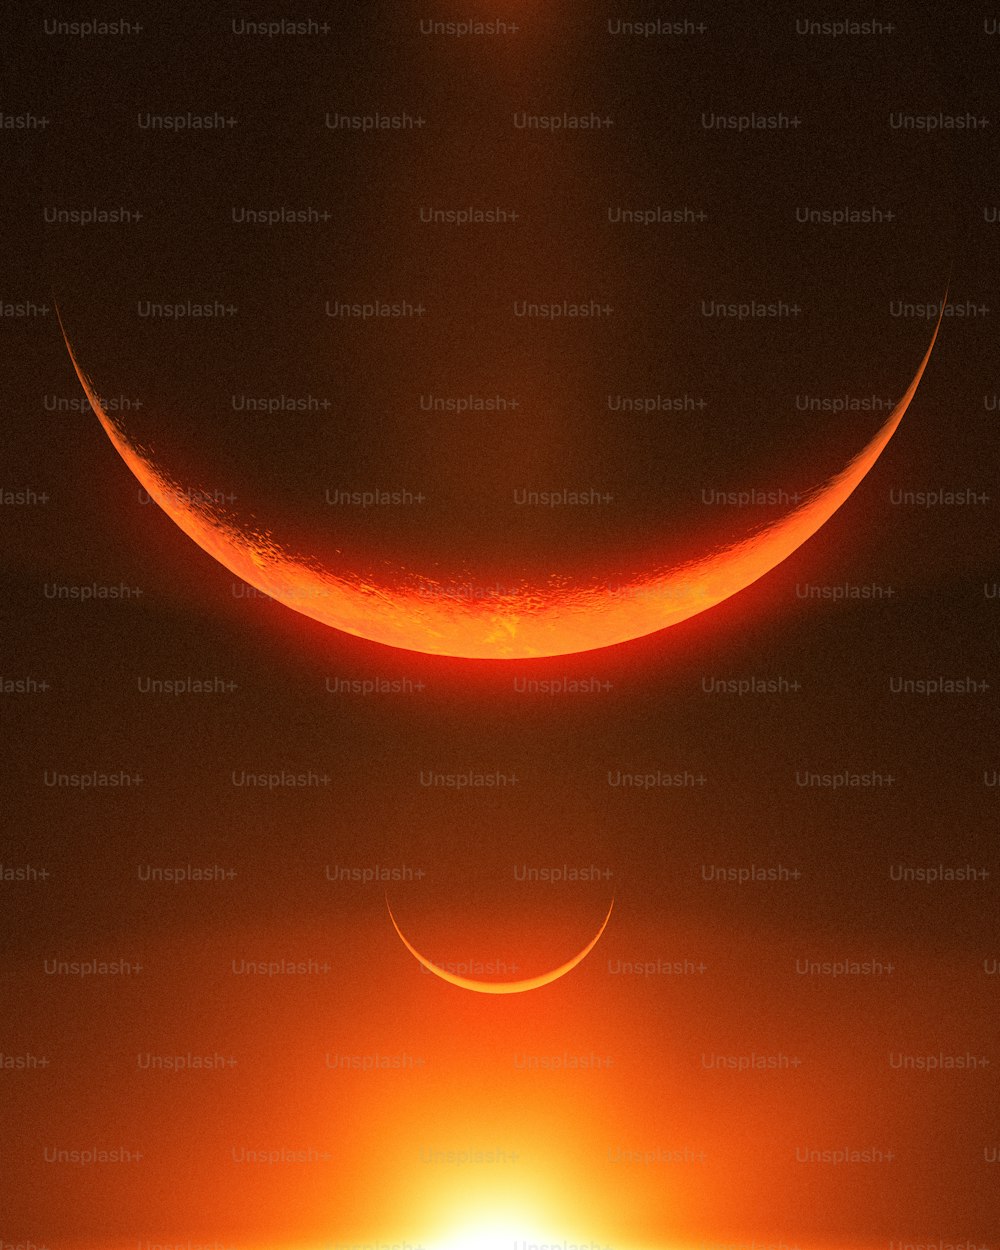 the sun is setting over the horizon of a crescent